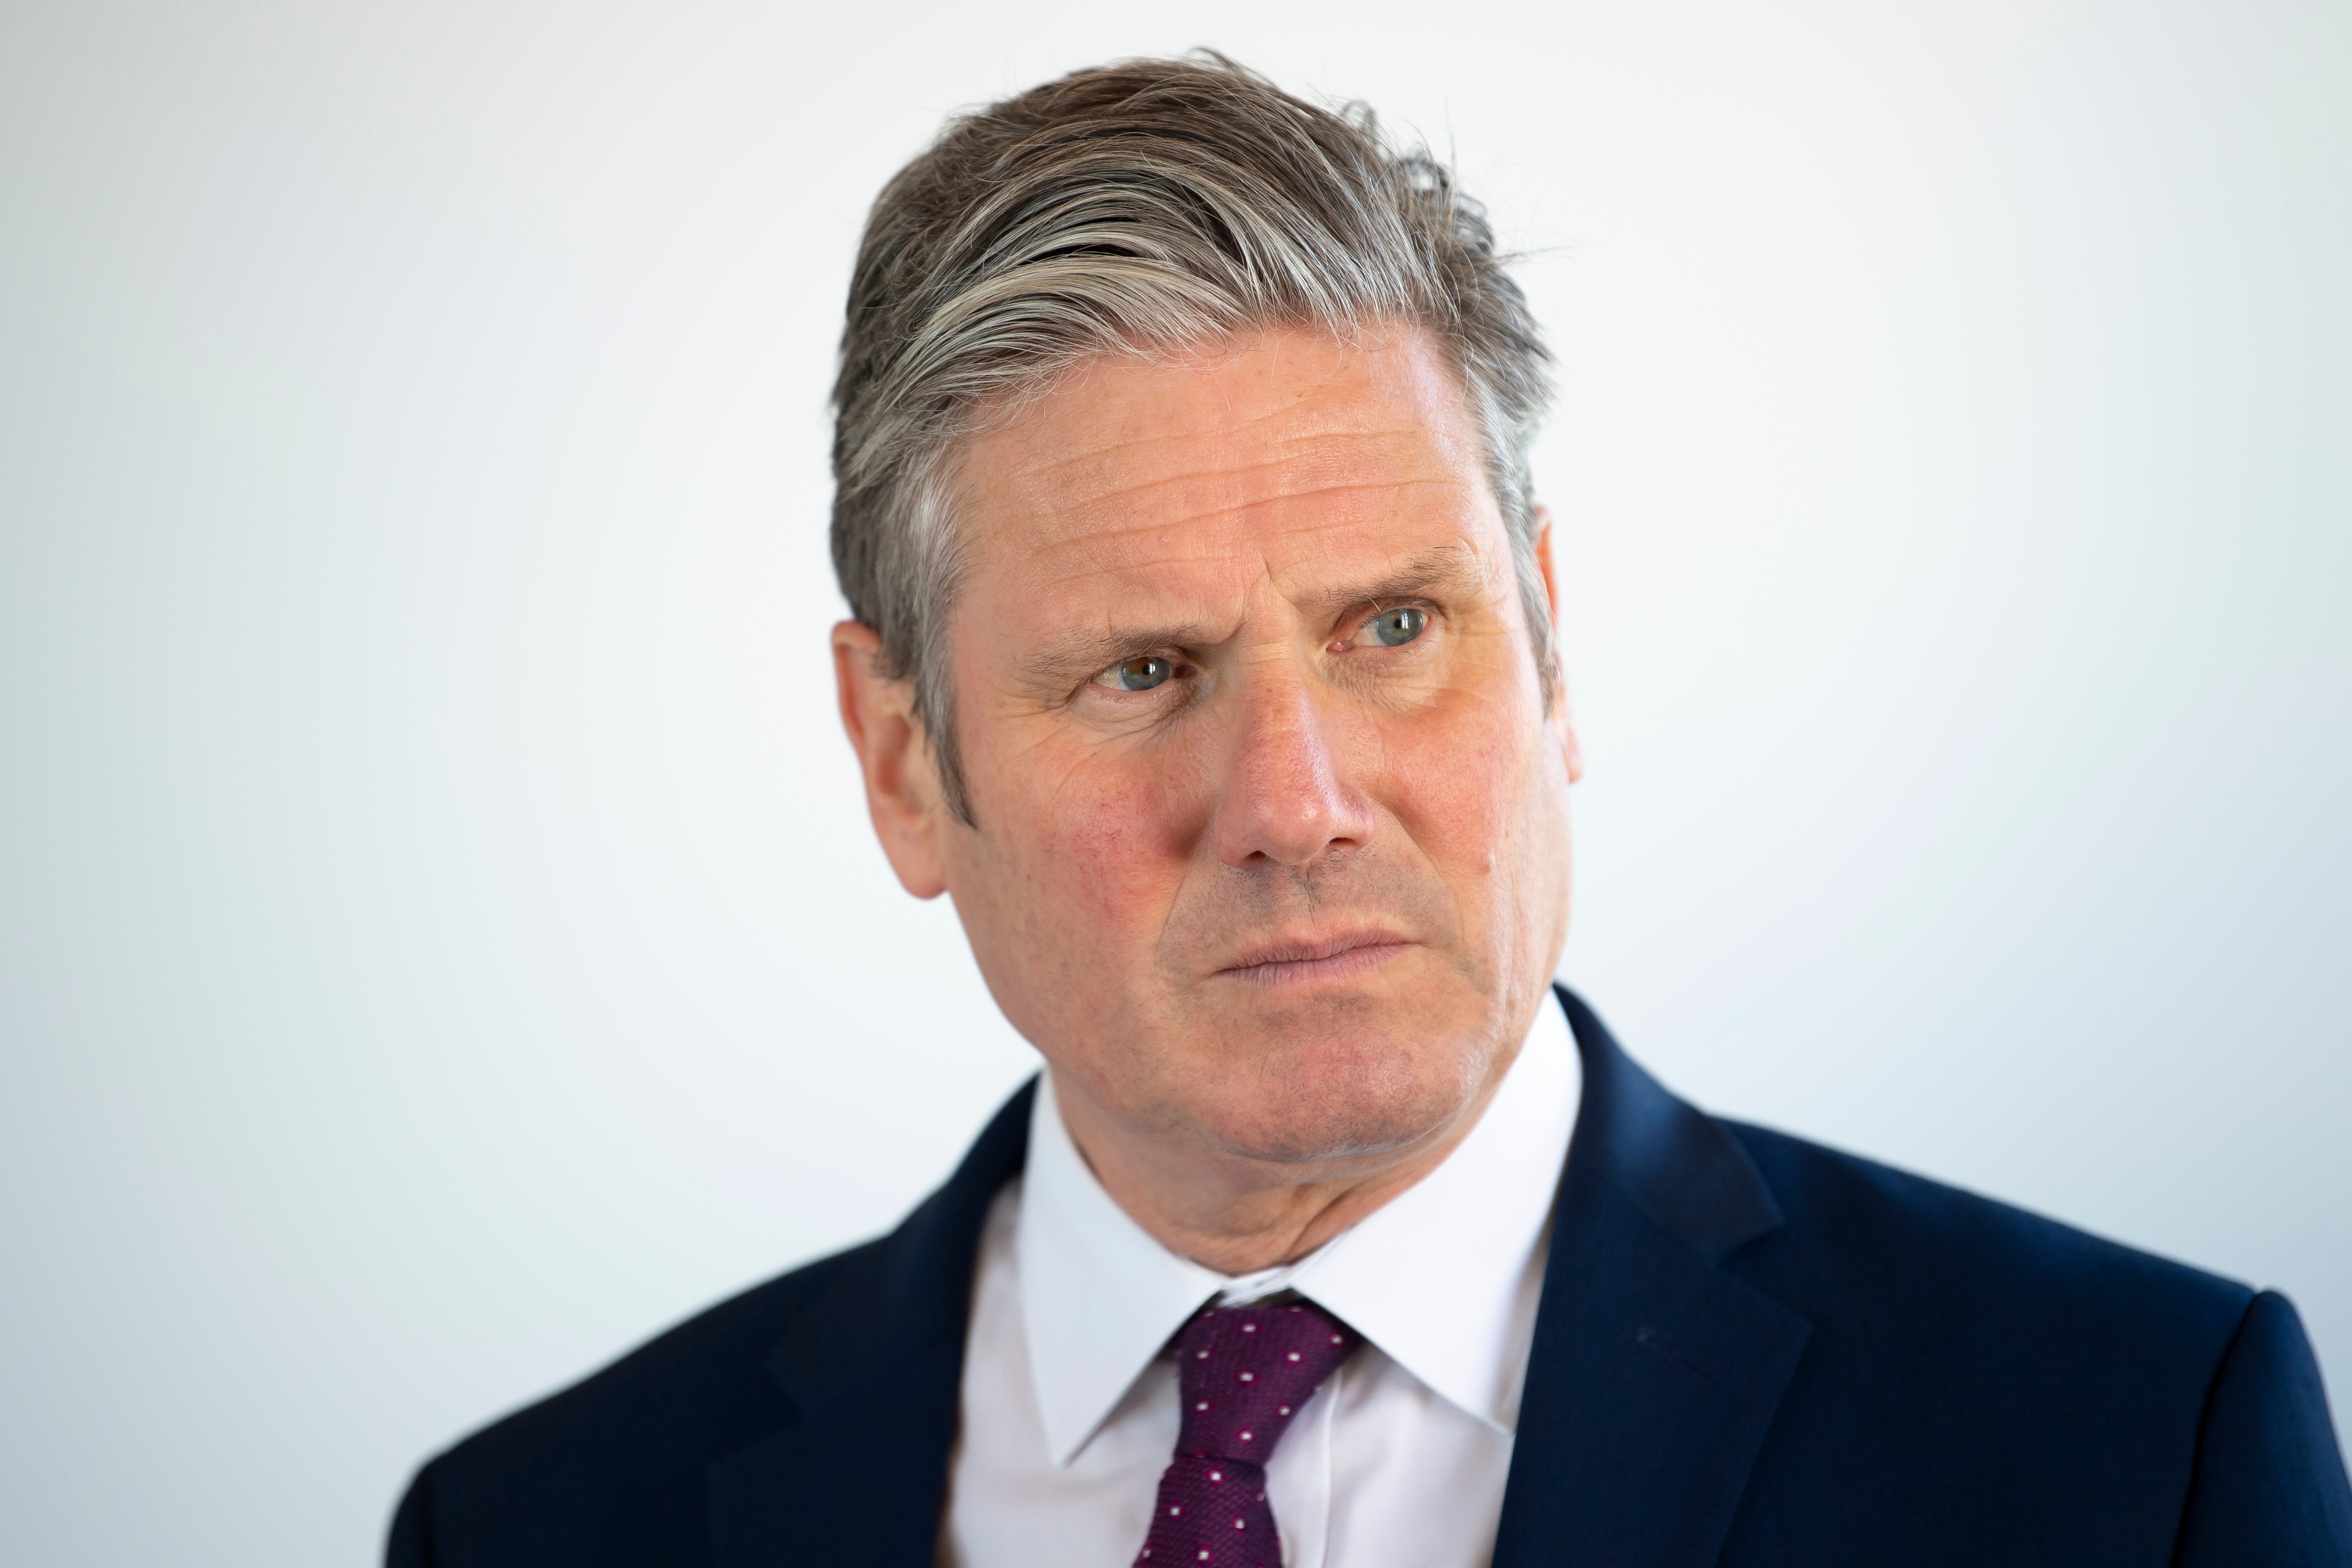 Keir Starmer, leader of the Labour Party